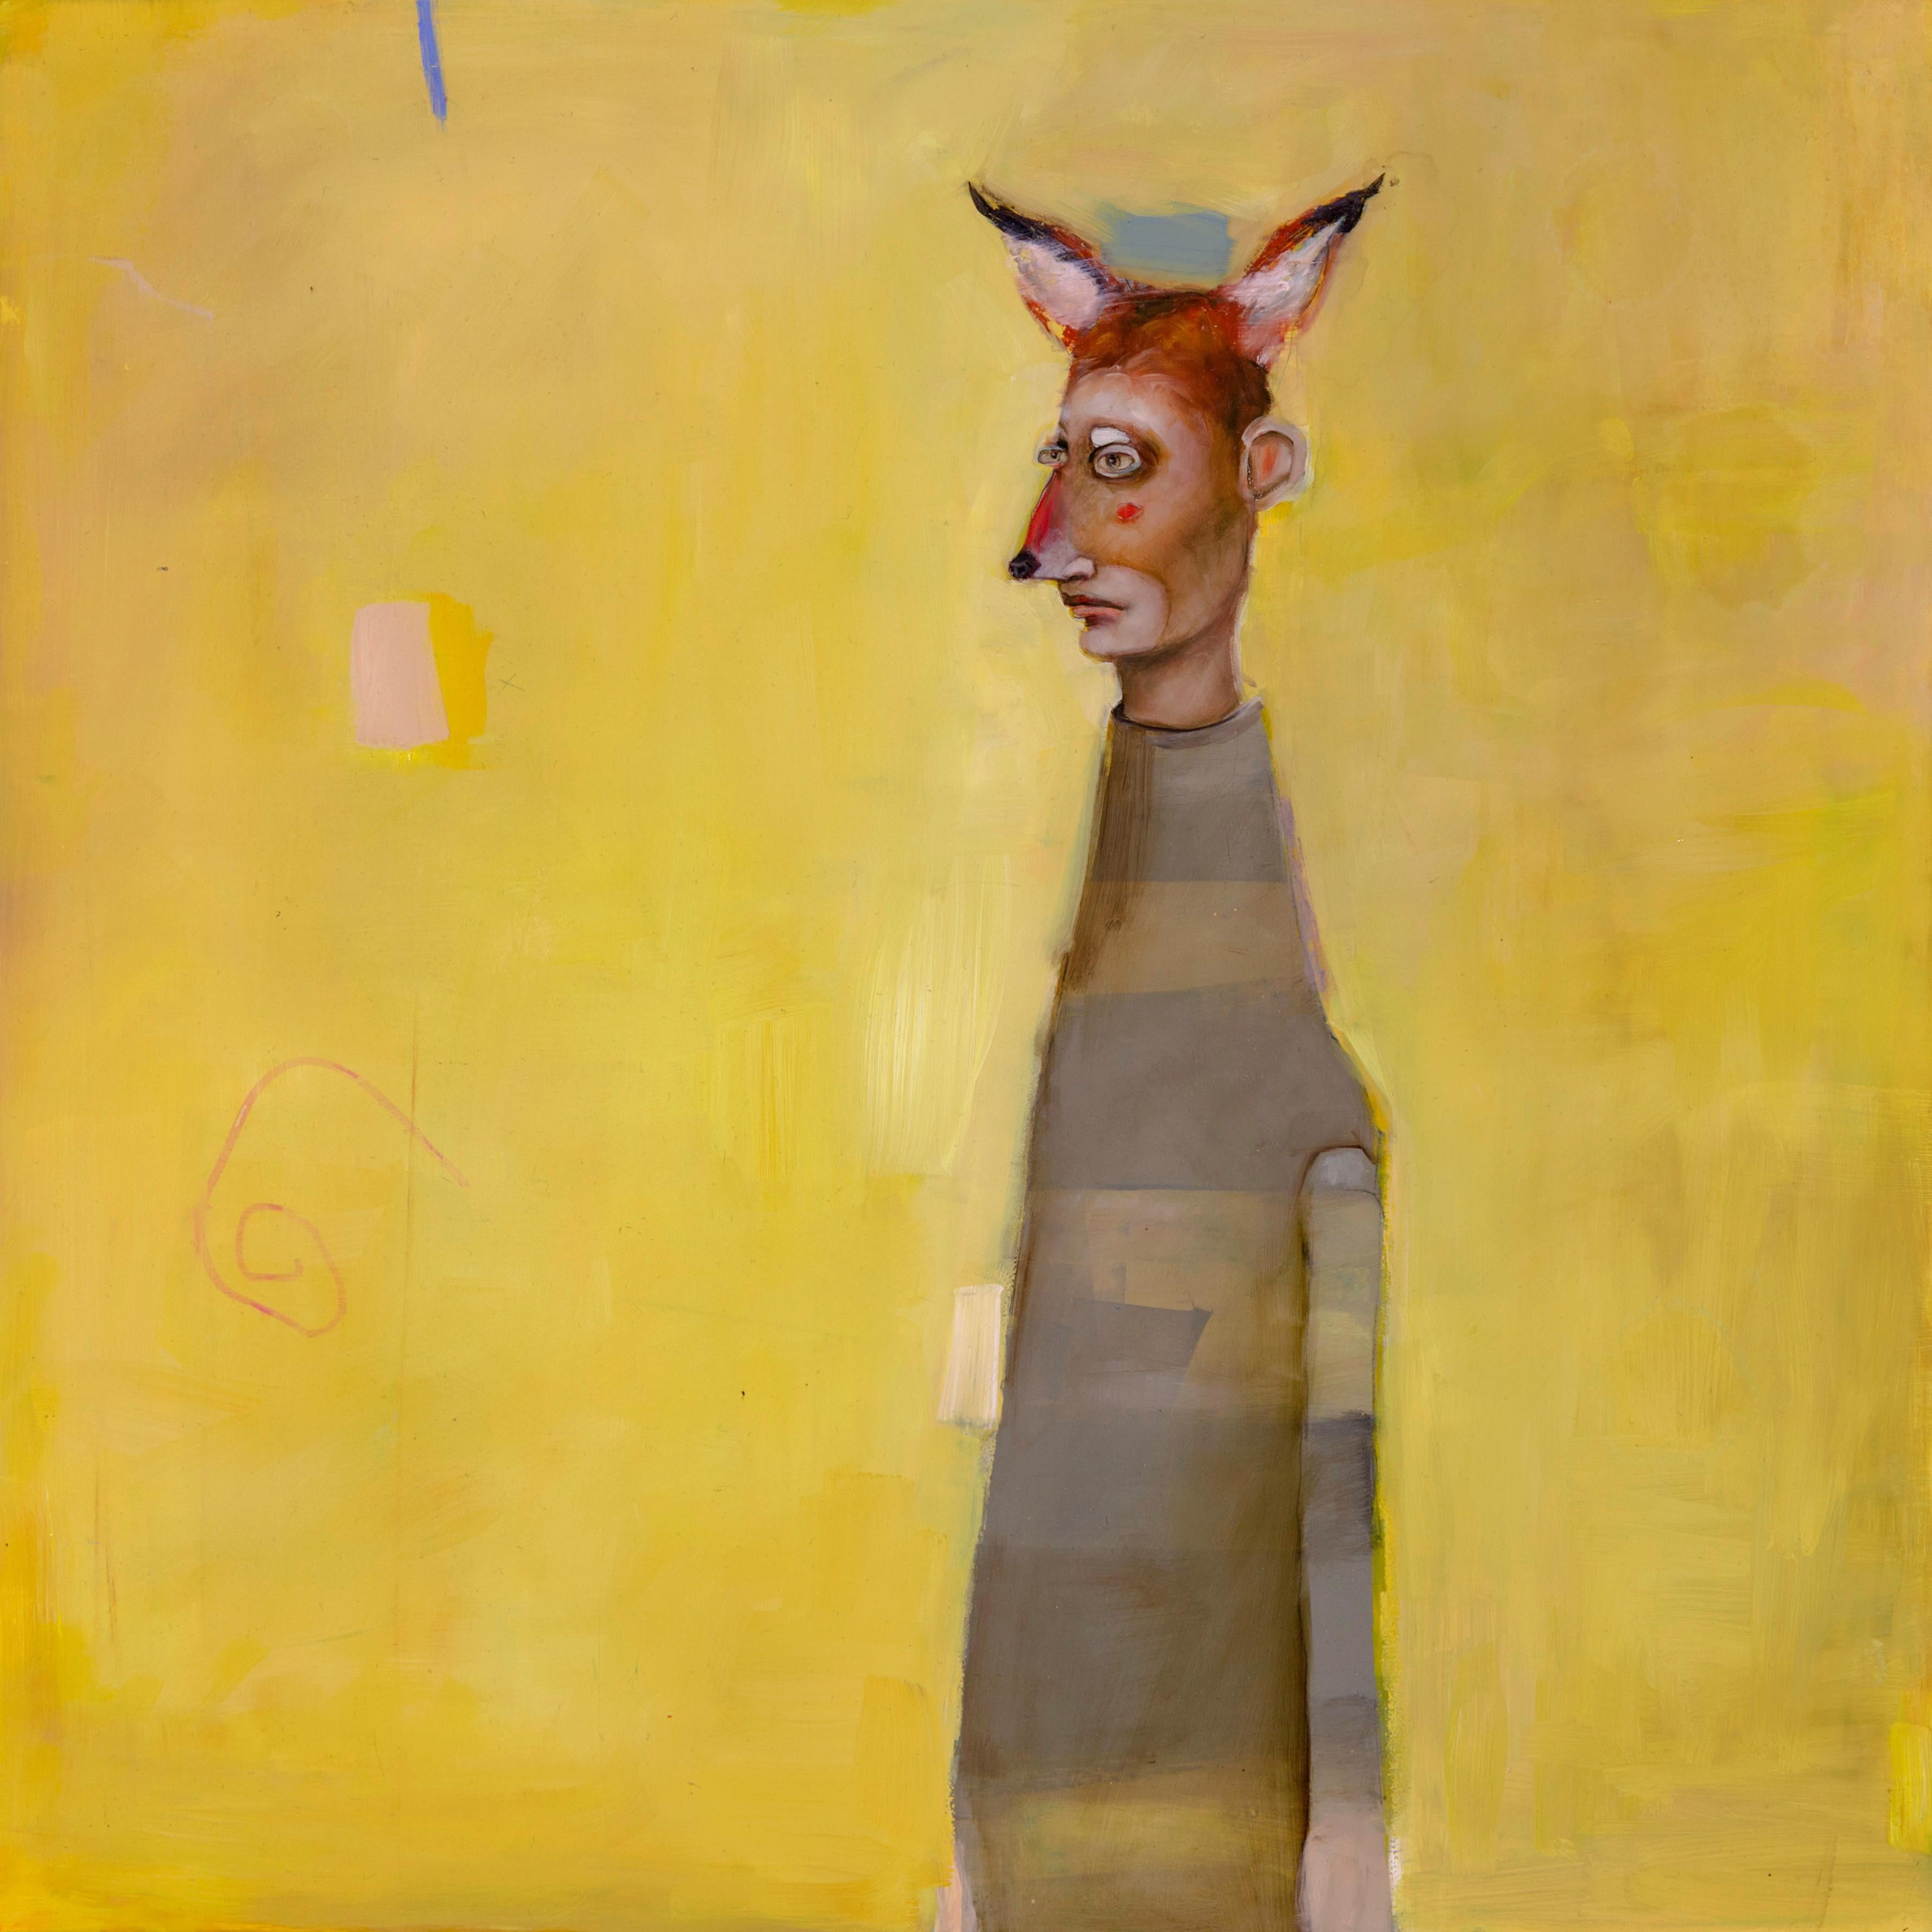 Michele Mikesell Animal Painting - Muddy Fox, Oil on canvas, figurative pop art portrait with yellow background